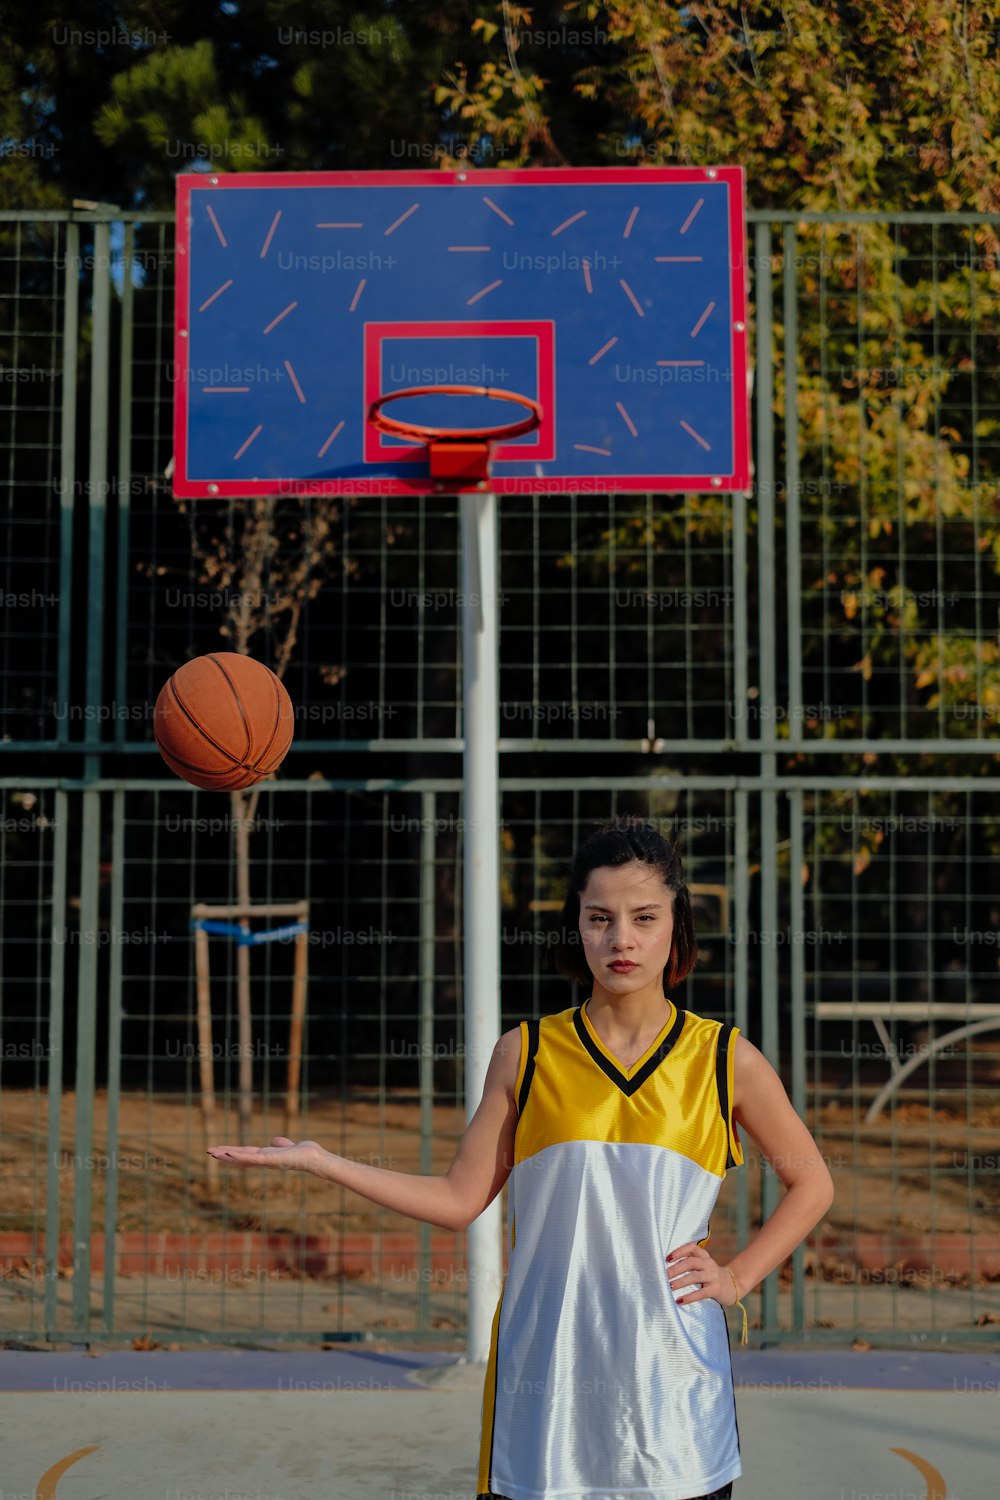 a young girl is playing basketball on a court